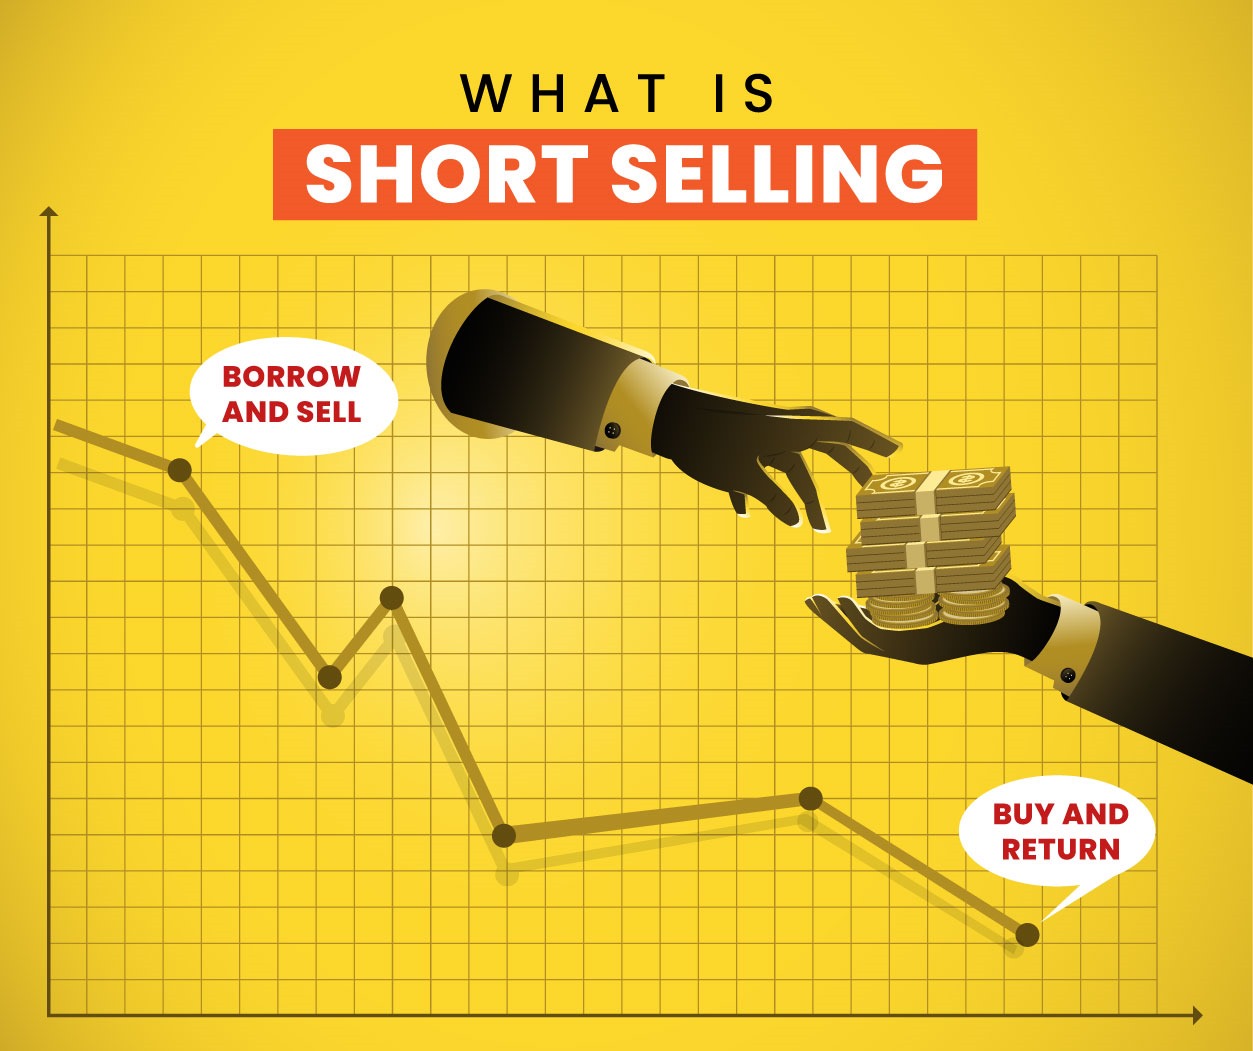 What is Short Selling in Stock Market?